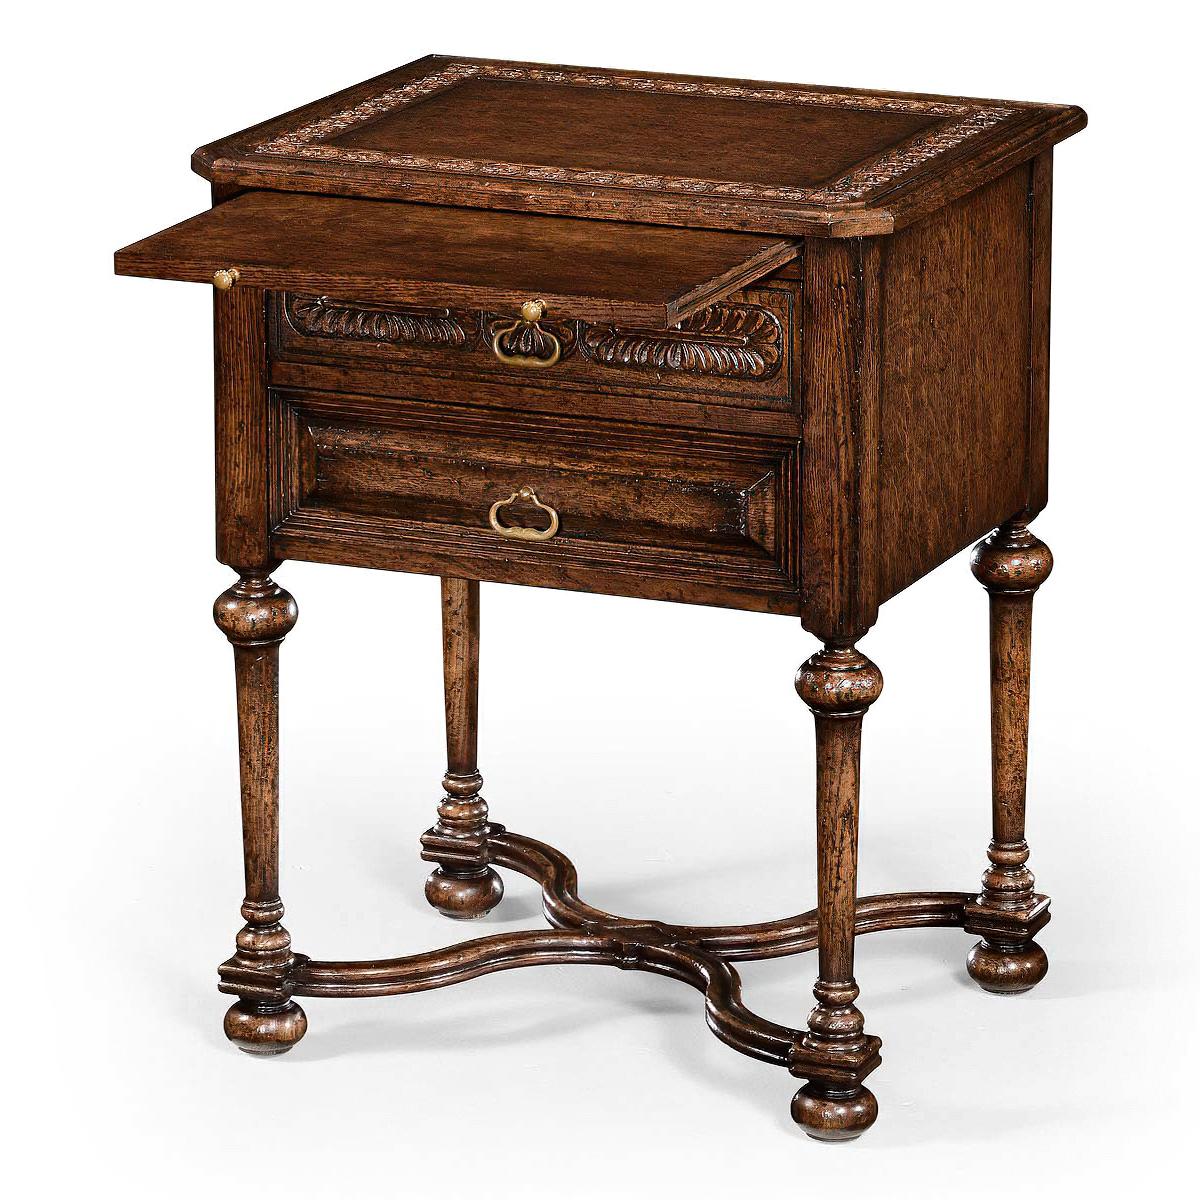 An Elizabethan style oak bedside table, the dark brown oak side table with stepped pyramidal paneled moldings to the two drawer fronts and stylized brass drawer handles. Inset leather panel to top and slide beneath. Turned tapering baluster legs